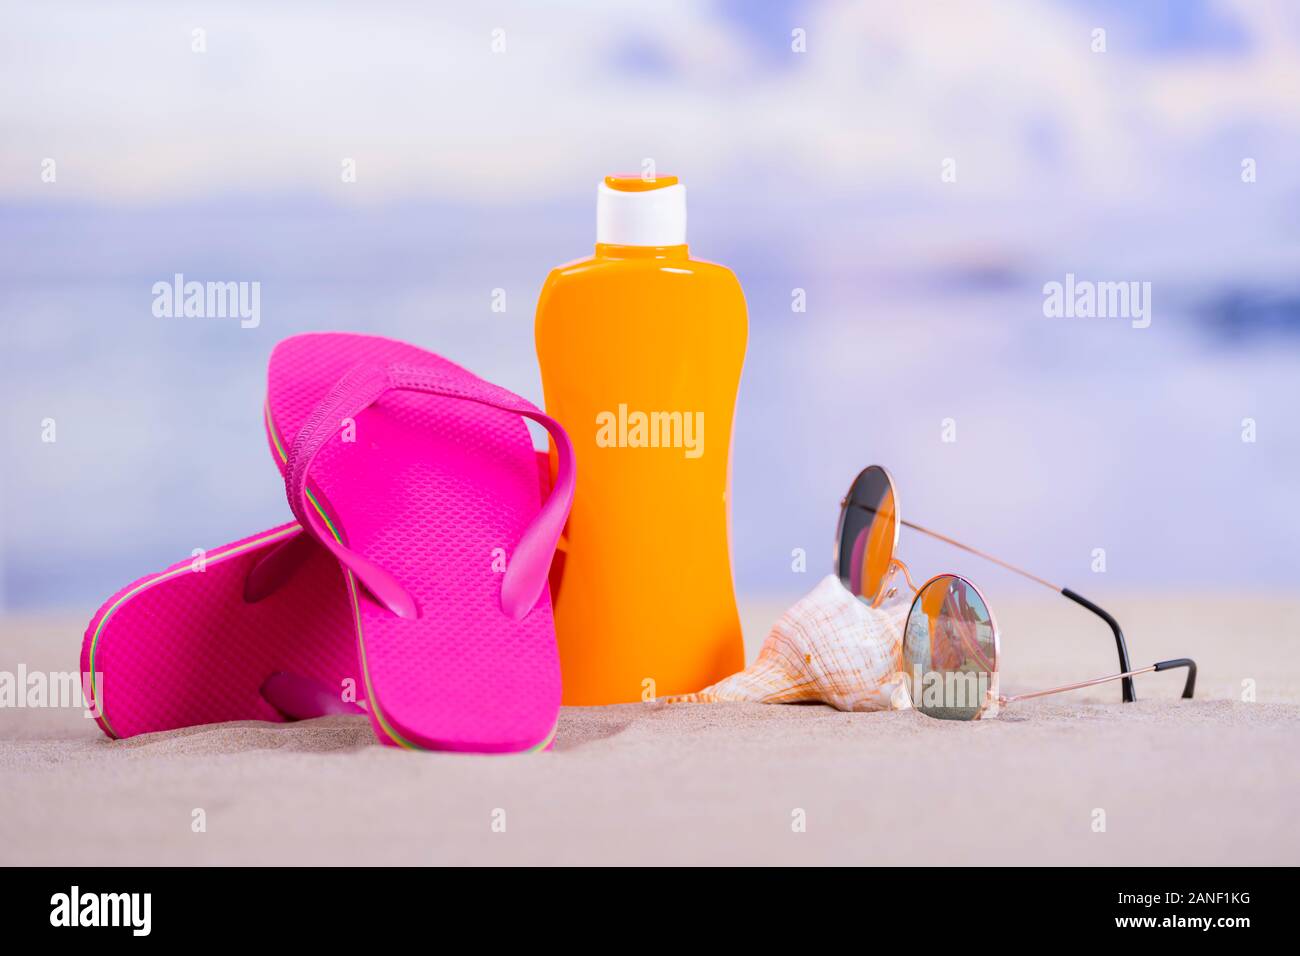 Close-up of an orange sunscreen bottle surrounded by pink flip flops and a  pair of